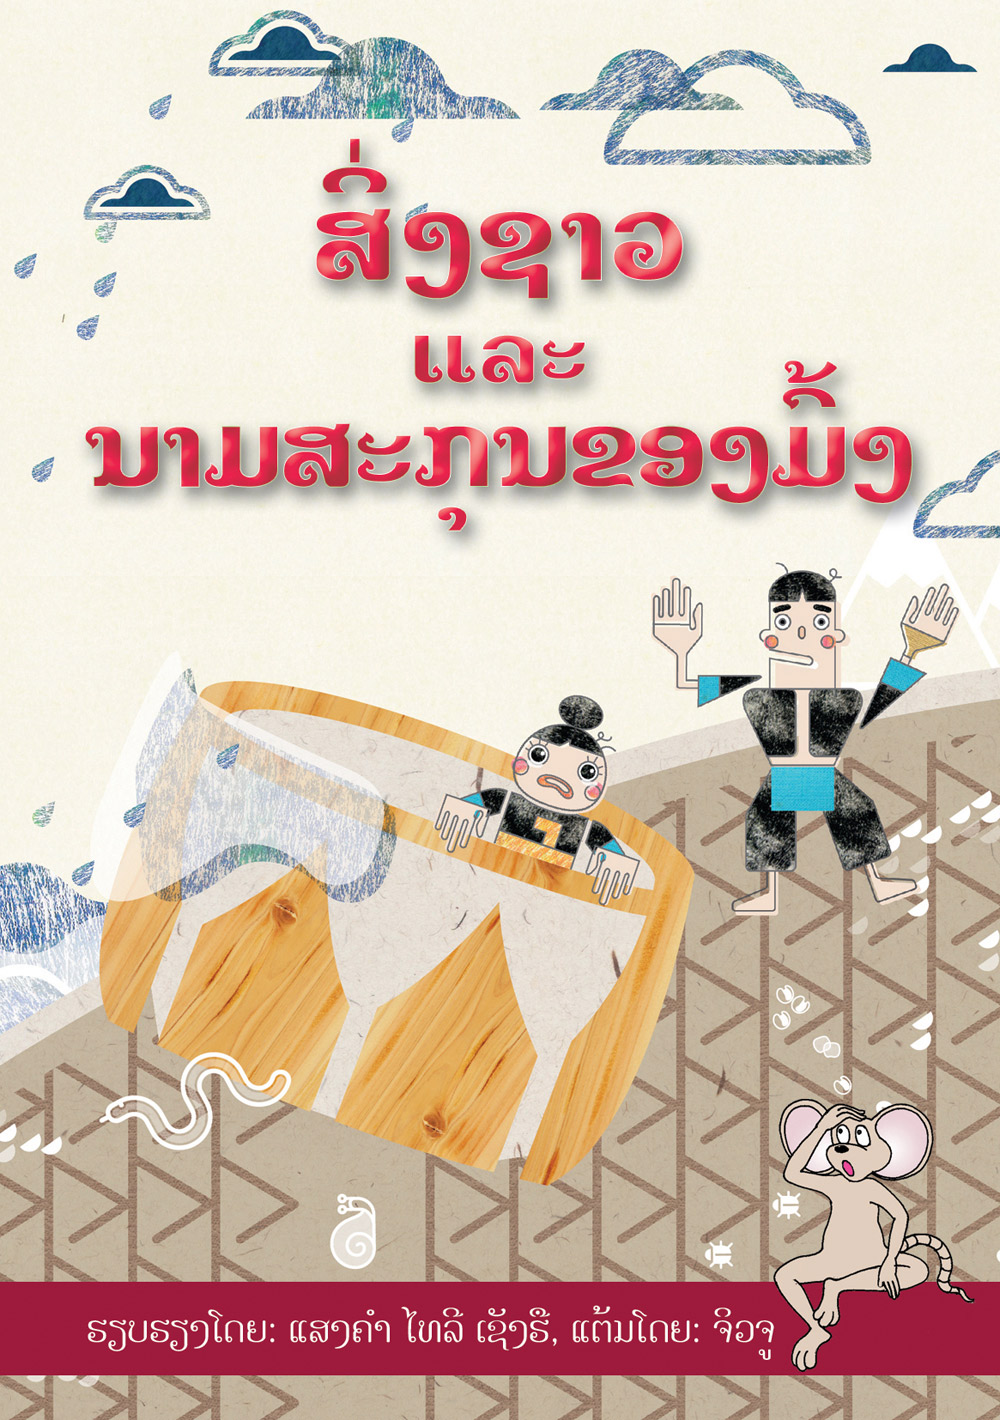 How Hmong People Got Their Names large book cover, published in Lao language